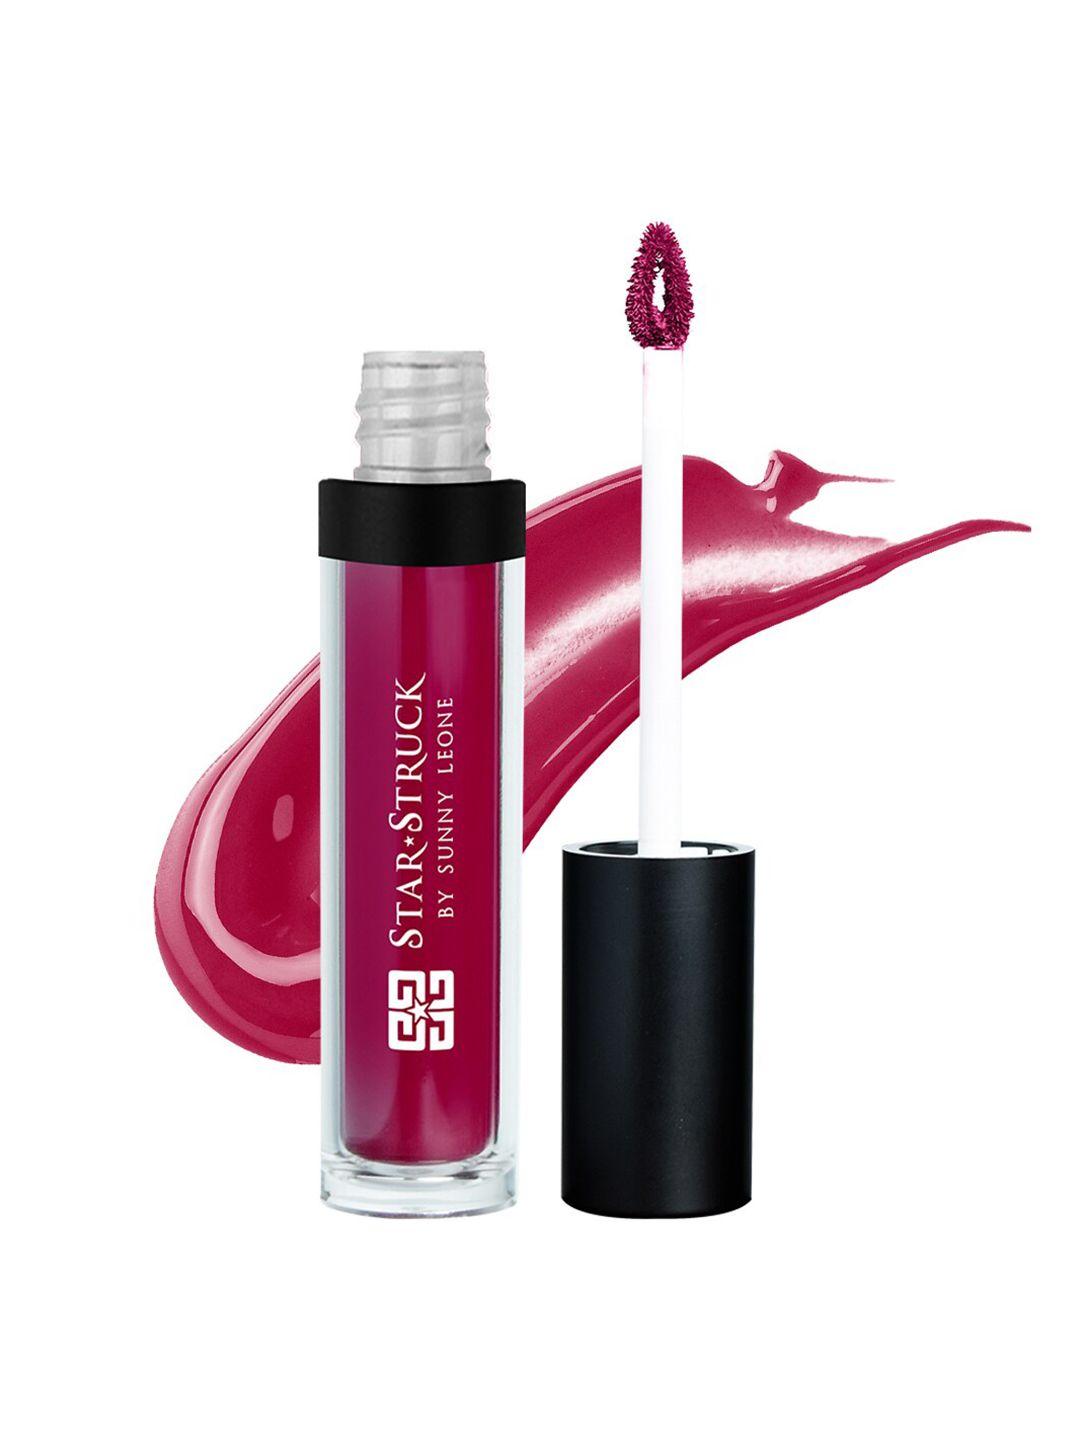 star struck by sunny leone hydrating glossy lip tint with hyaluronic acid 6ml- berry lippy